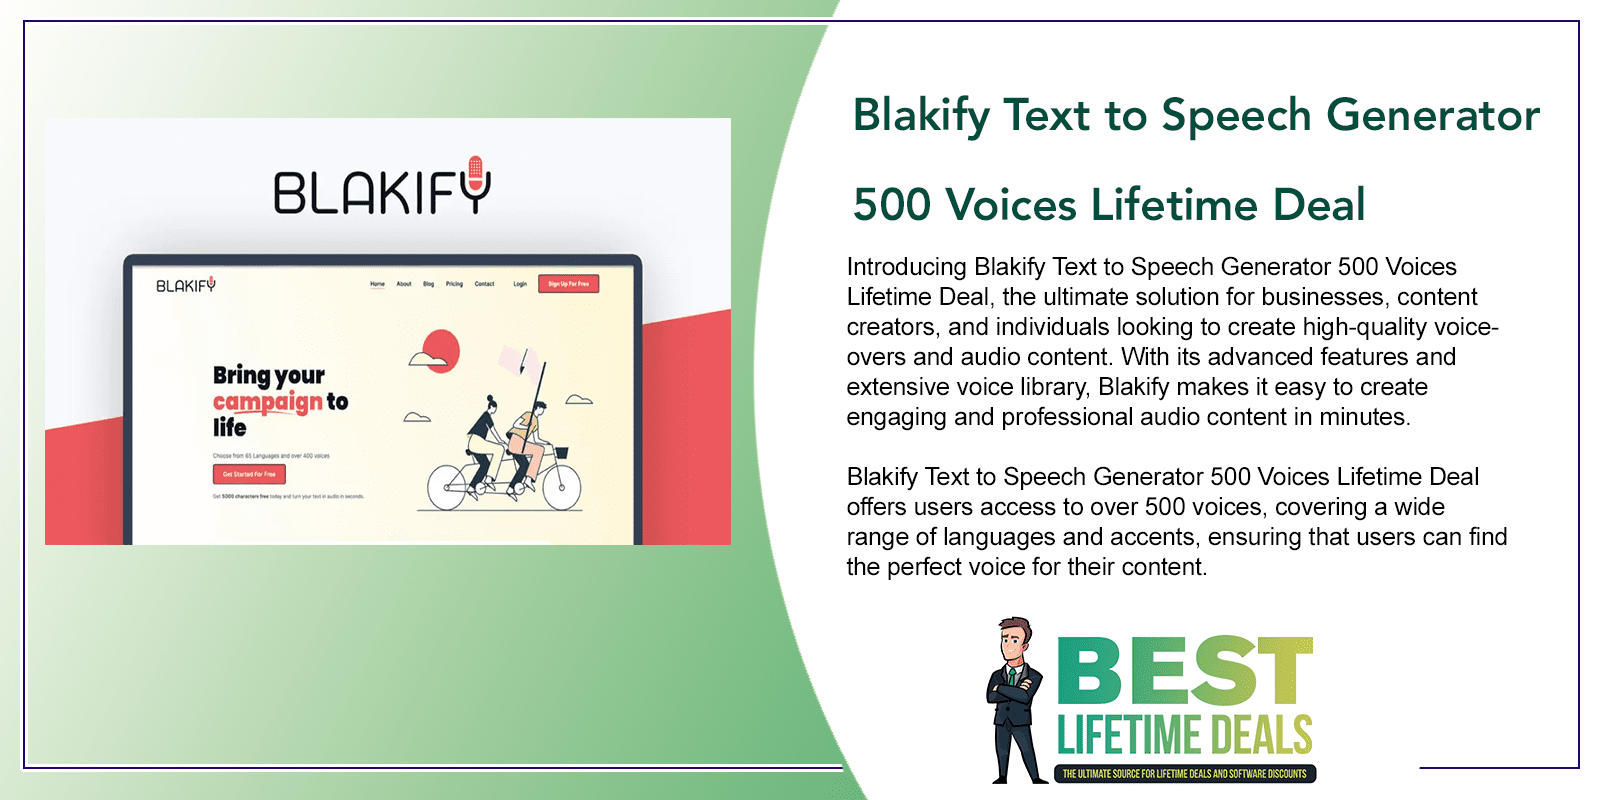 Blakify Text to Speech Generator 500 Voices Featured Image